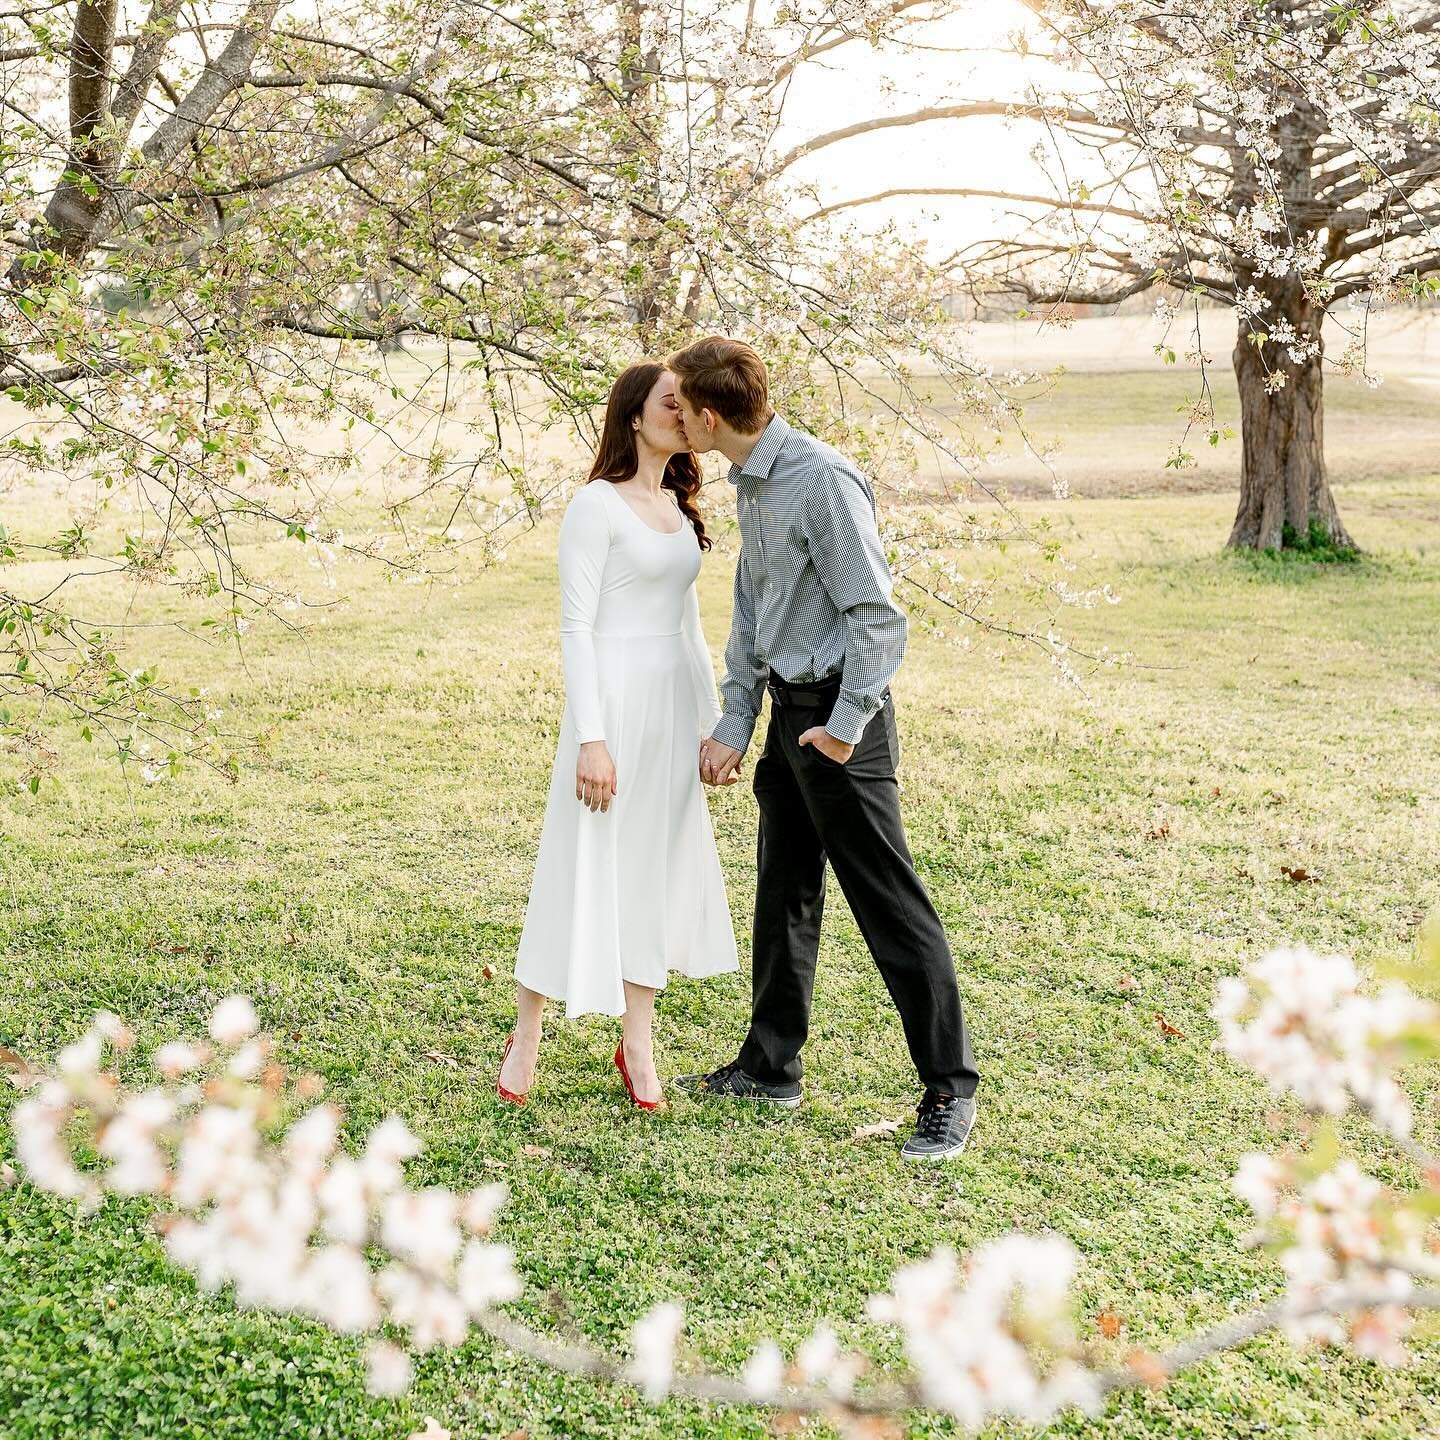 4:30am wake up call for Selah &amp; Tyler&rsquo;s morning ceremony in Arkansas today! 

These early spring moments from their engagement session were filled with so much tenderness. 

&bull;

#ehweddings